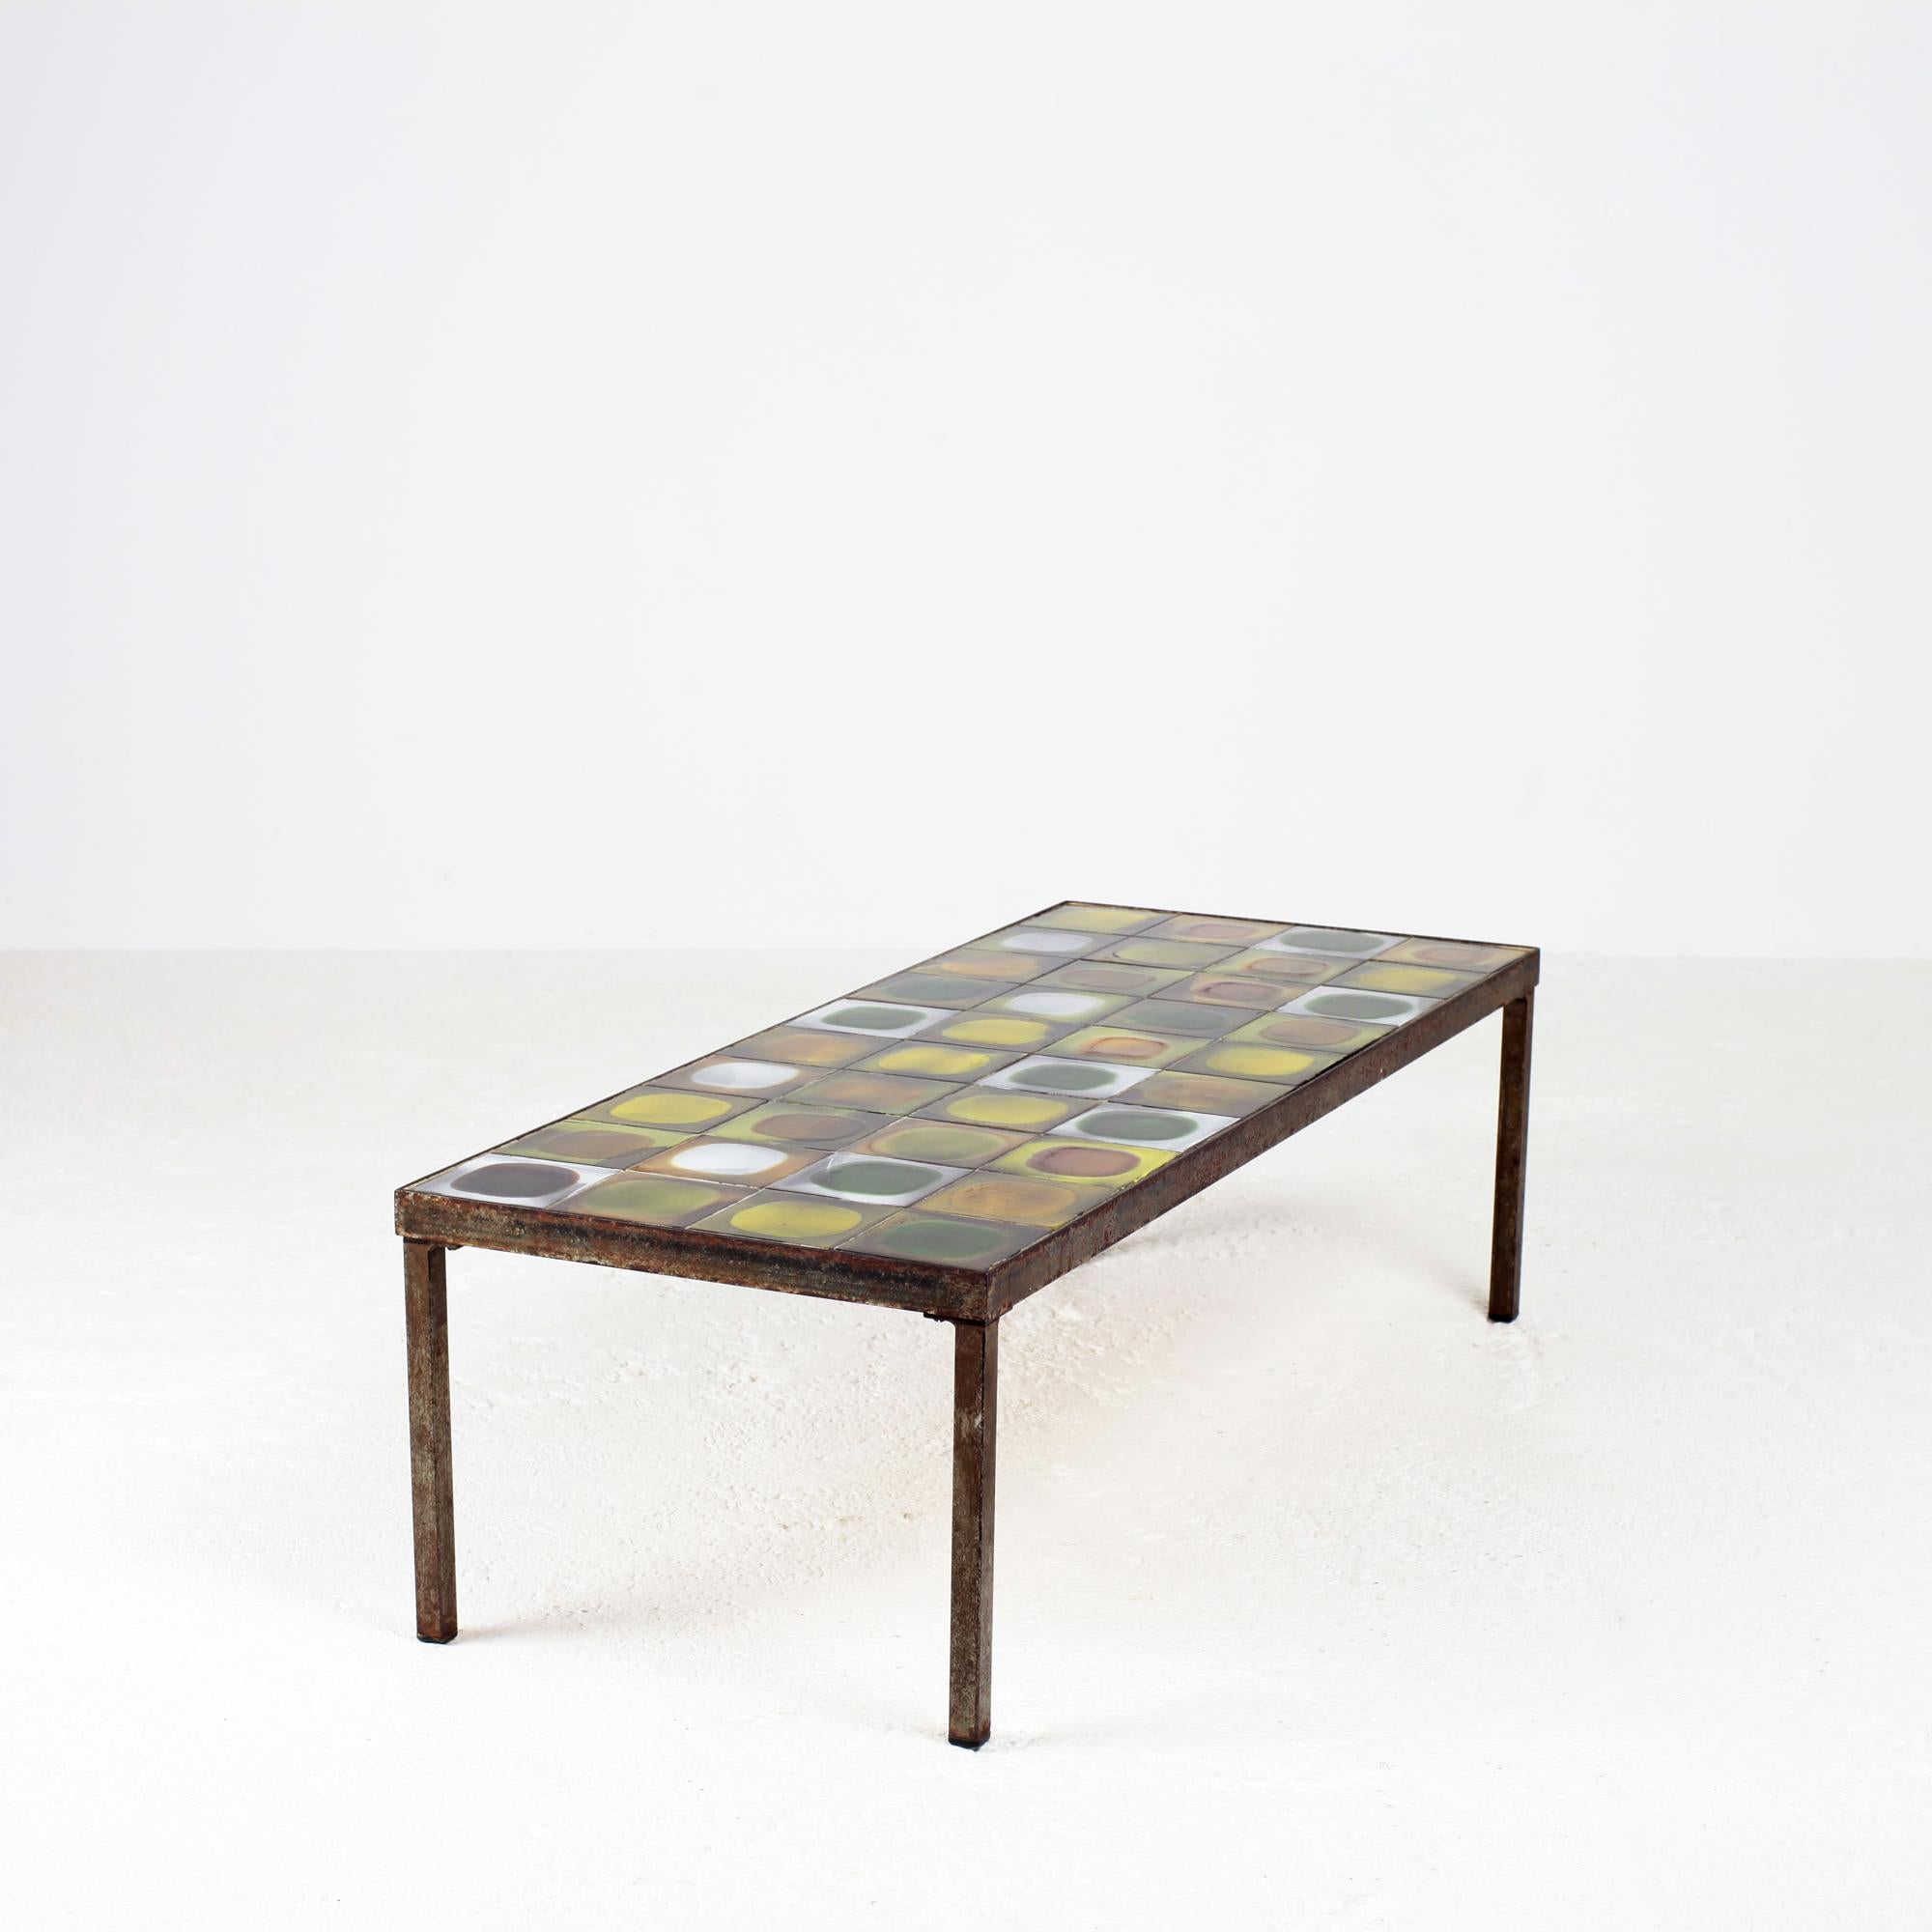 This coffee table was designed by Roger Capron.
It features metal legs and a tabletop decorated with glazed ceramic tiles.
The table is in a good vintage condition and signed by the French artist.